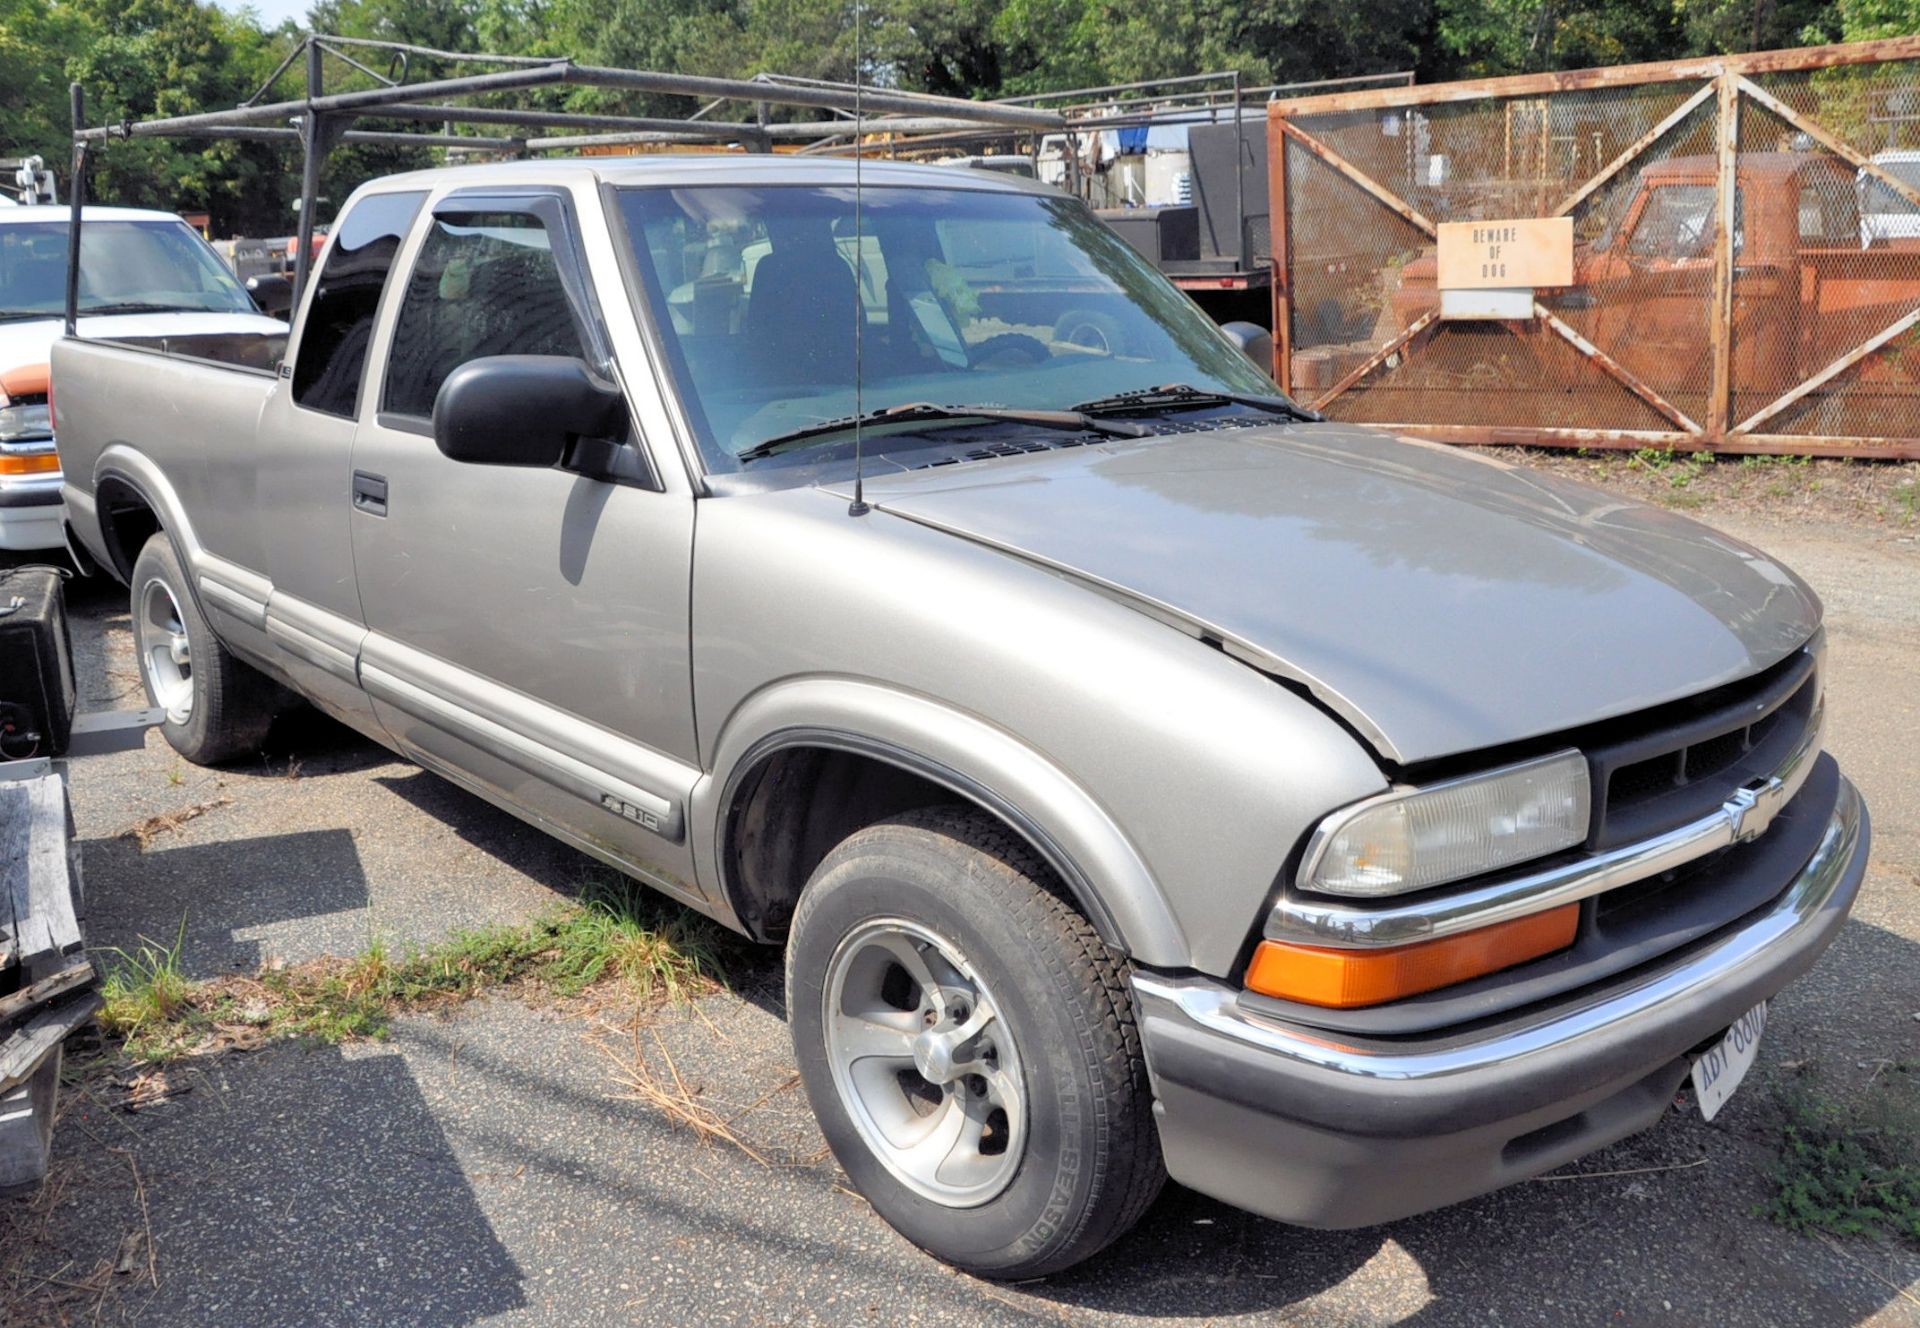 2000 Chevrolet S10 Pickup Truck, VIN 1GCCS1950YK264234, Extended Cab, Short Box, 2300 4-Cylinder Gas - Image 2 of 11